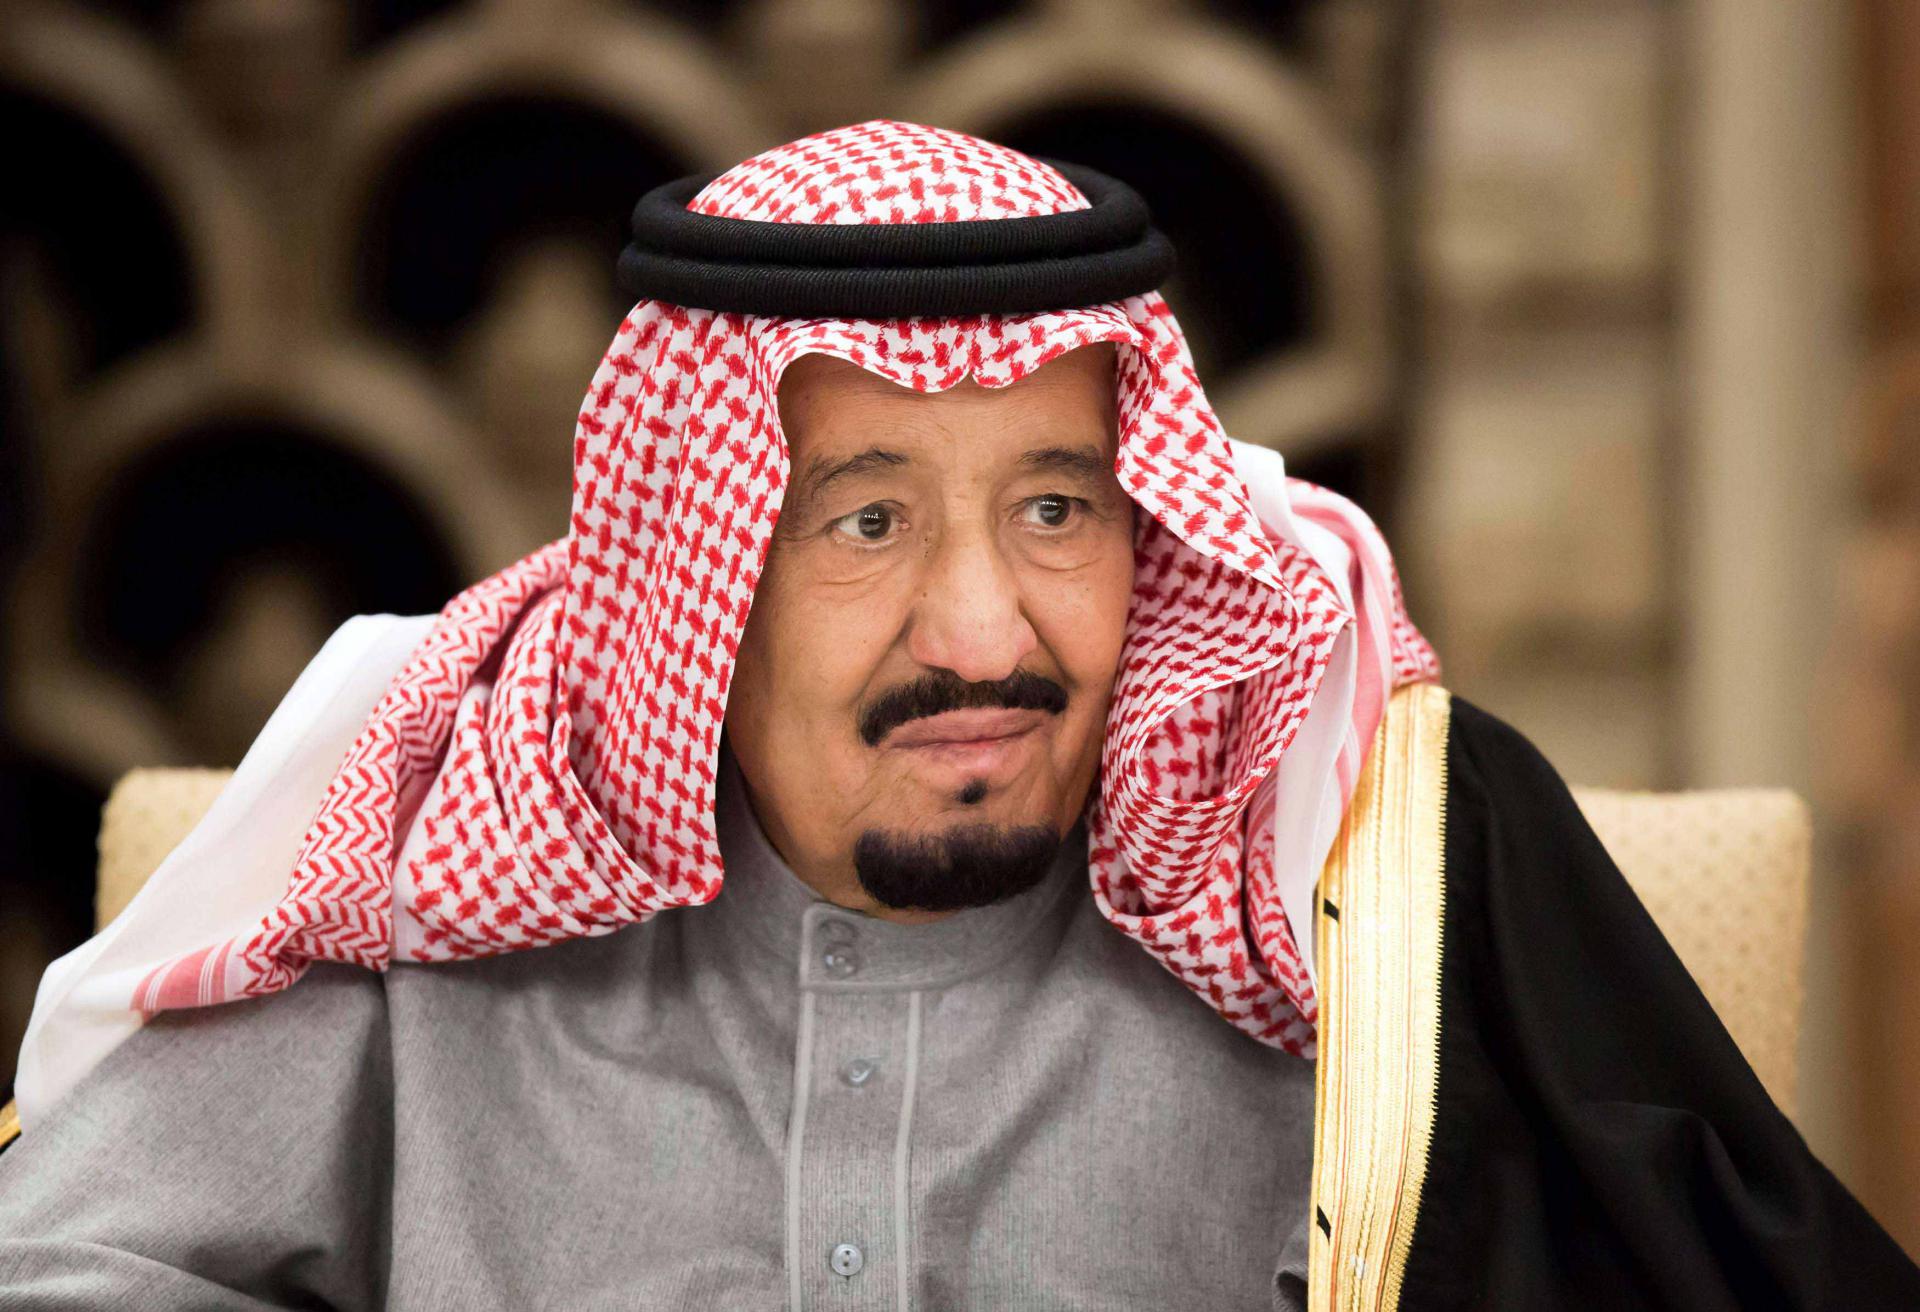 Saudi rulers appear to be shoring up support domestically, including within the royal family, following the crisis.